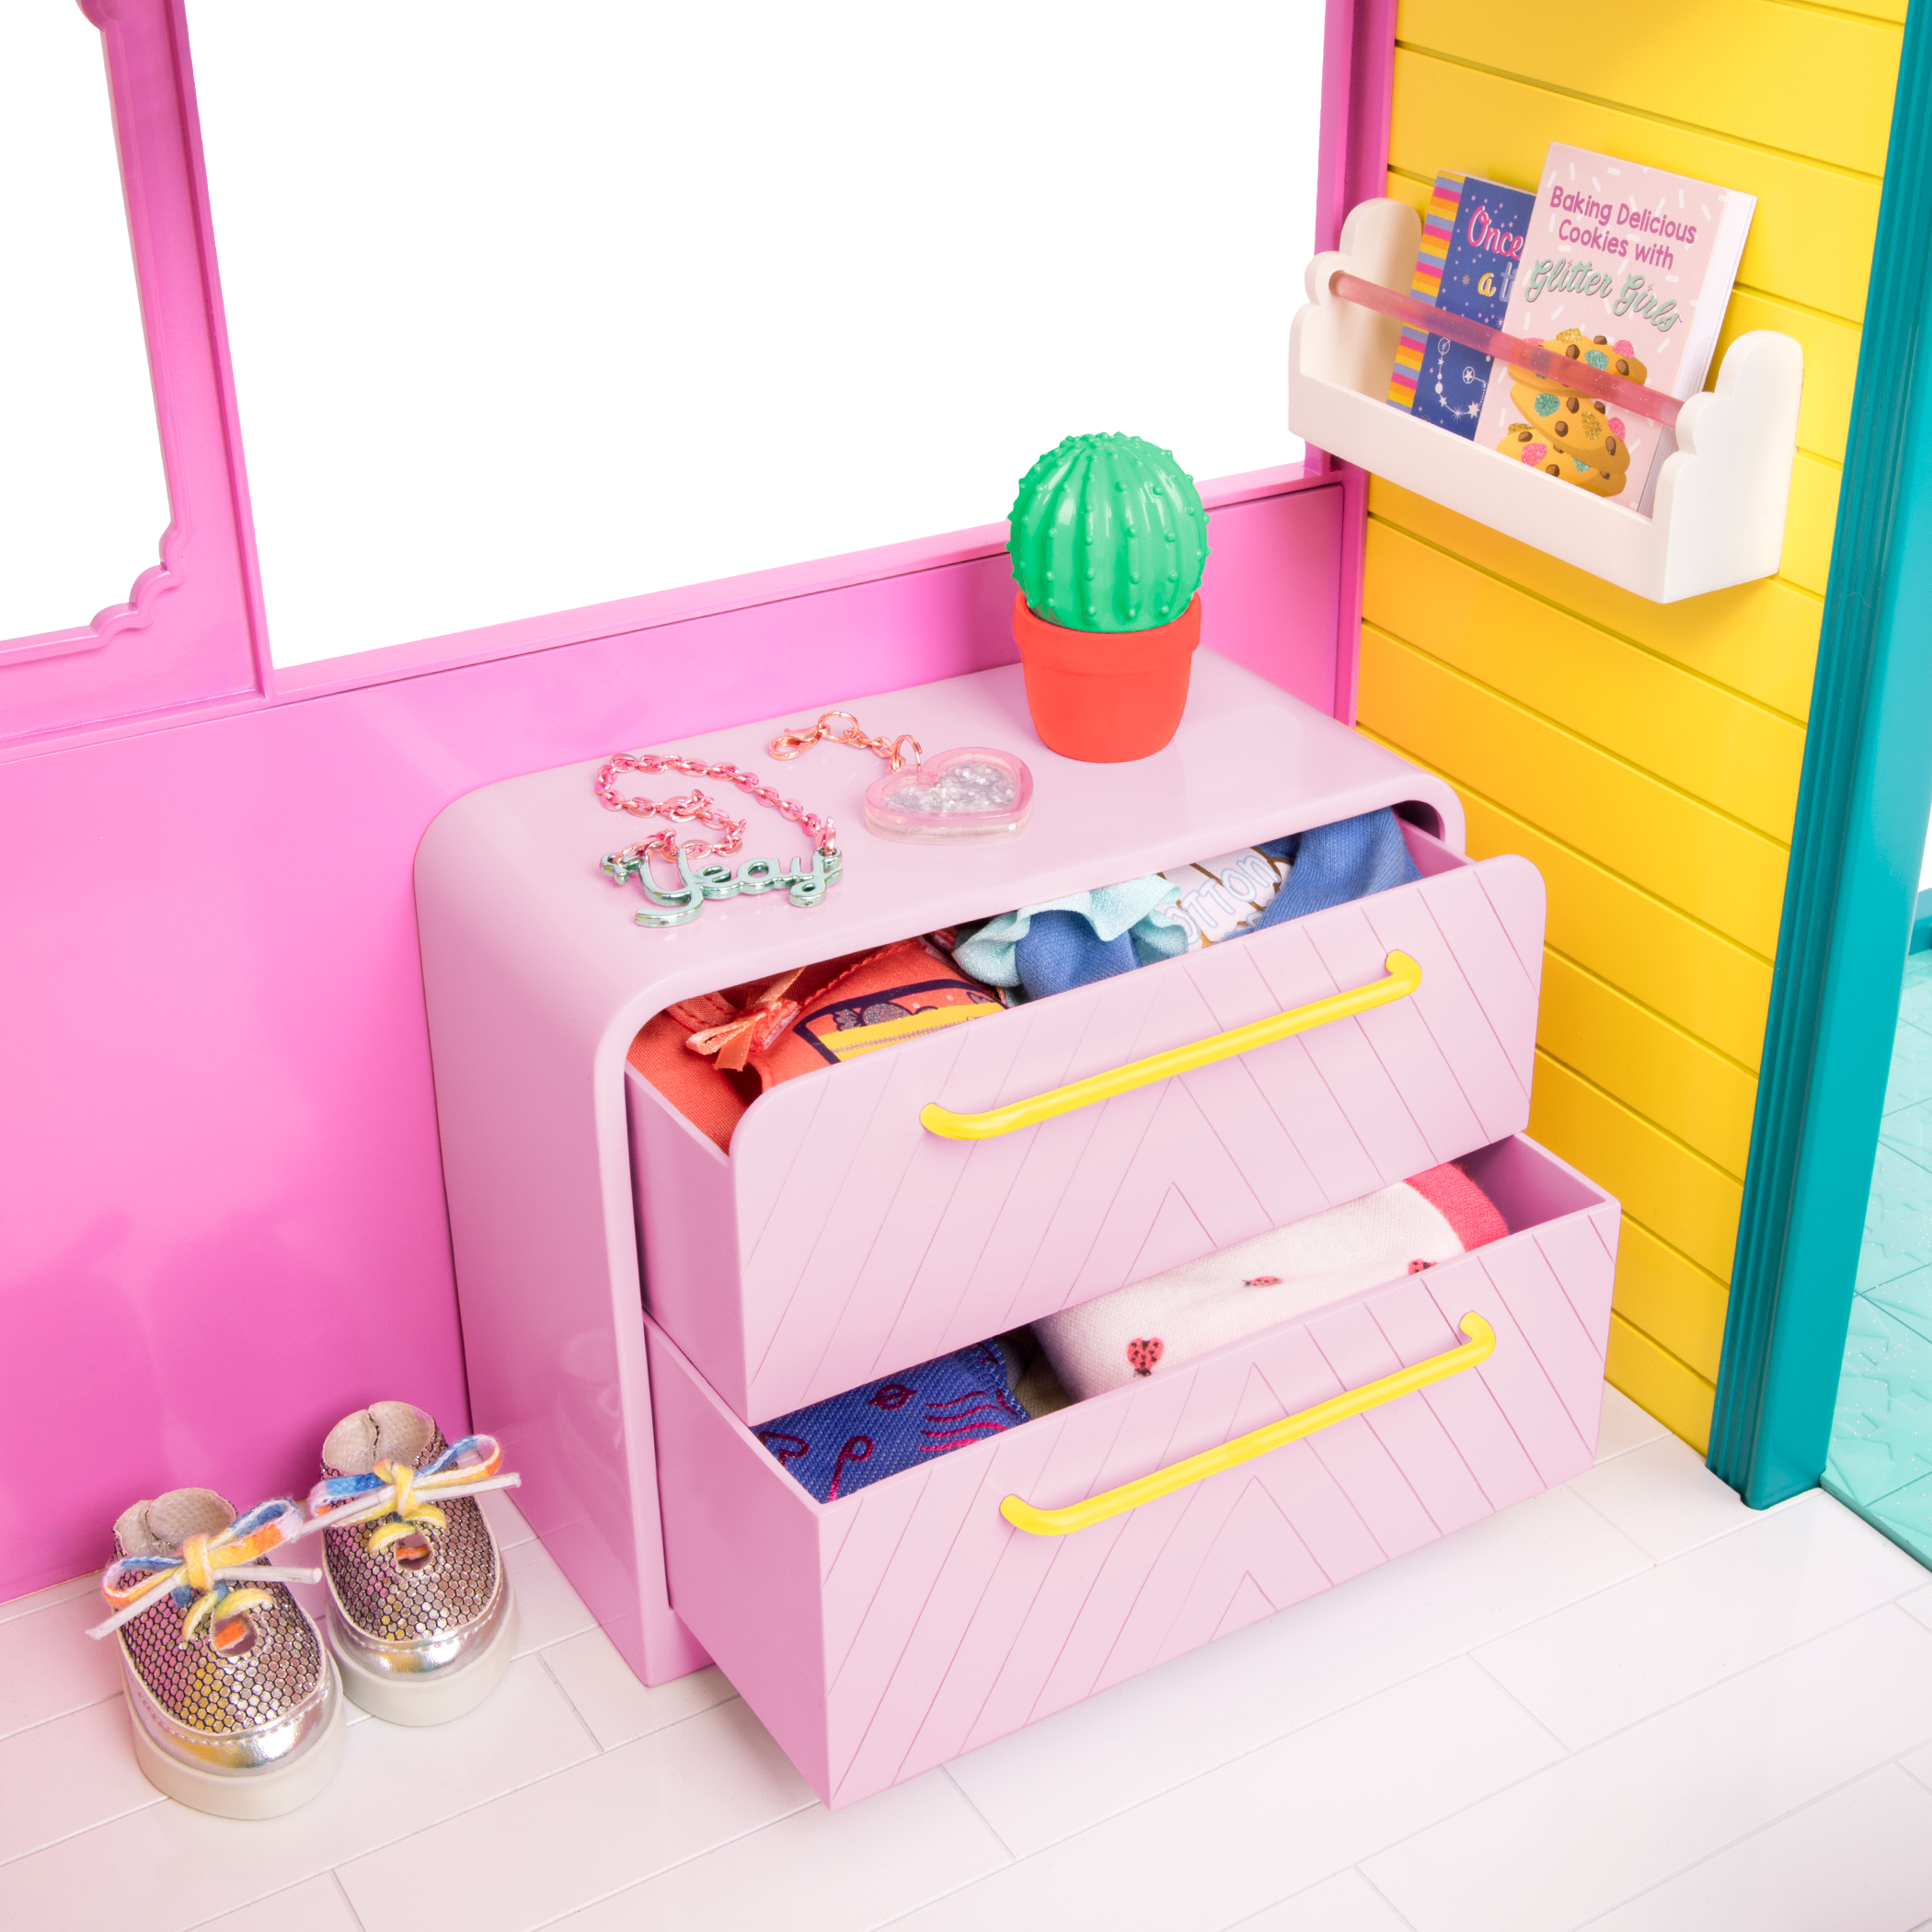 Glitter Girls Dolls by Battat – GG Doll House Playset with Furniture and Home Accessories – Kitchen, Oven, and Patio – 14 inch Doll Clothes and ACC